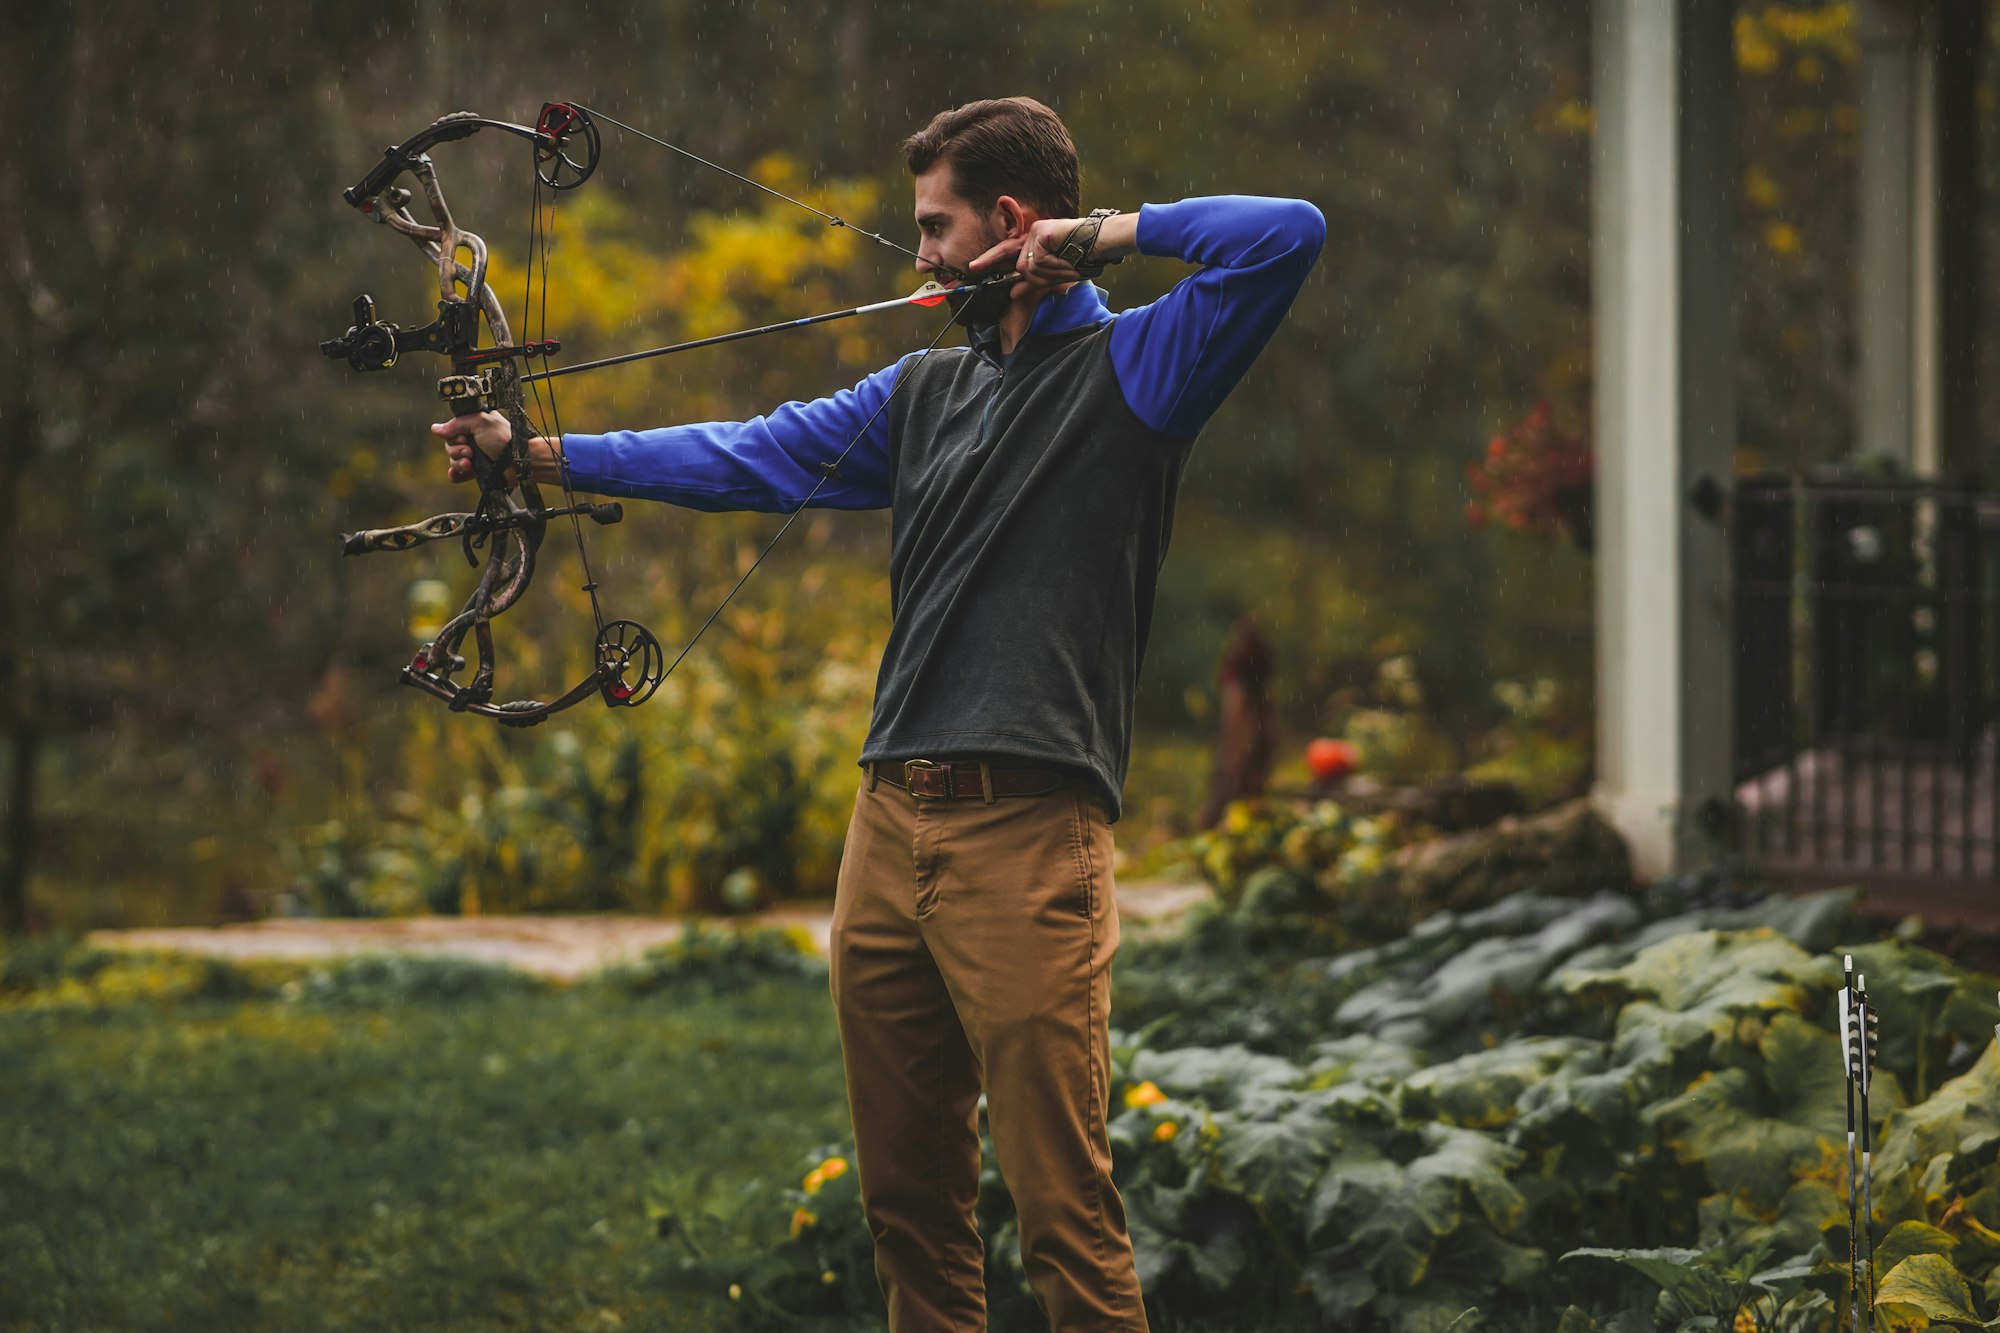 Top 5 Best Compound Bow Of 2022 | Flagship Compound Bow For 2022 Reviewed